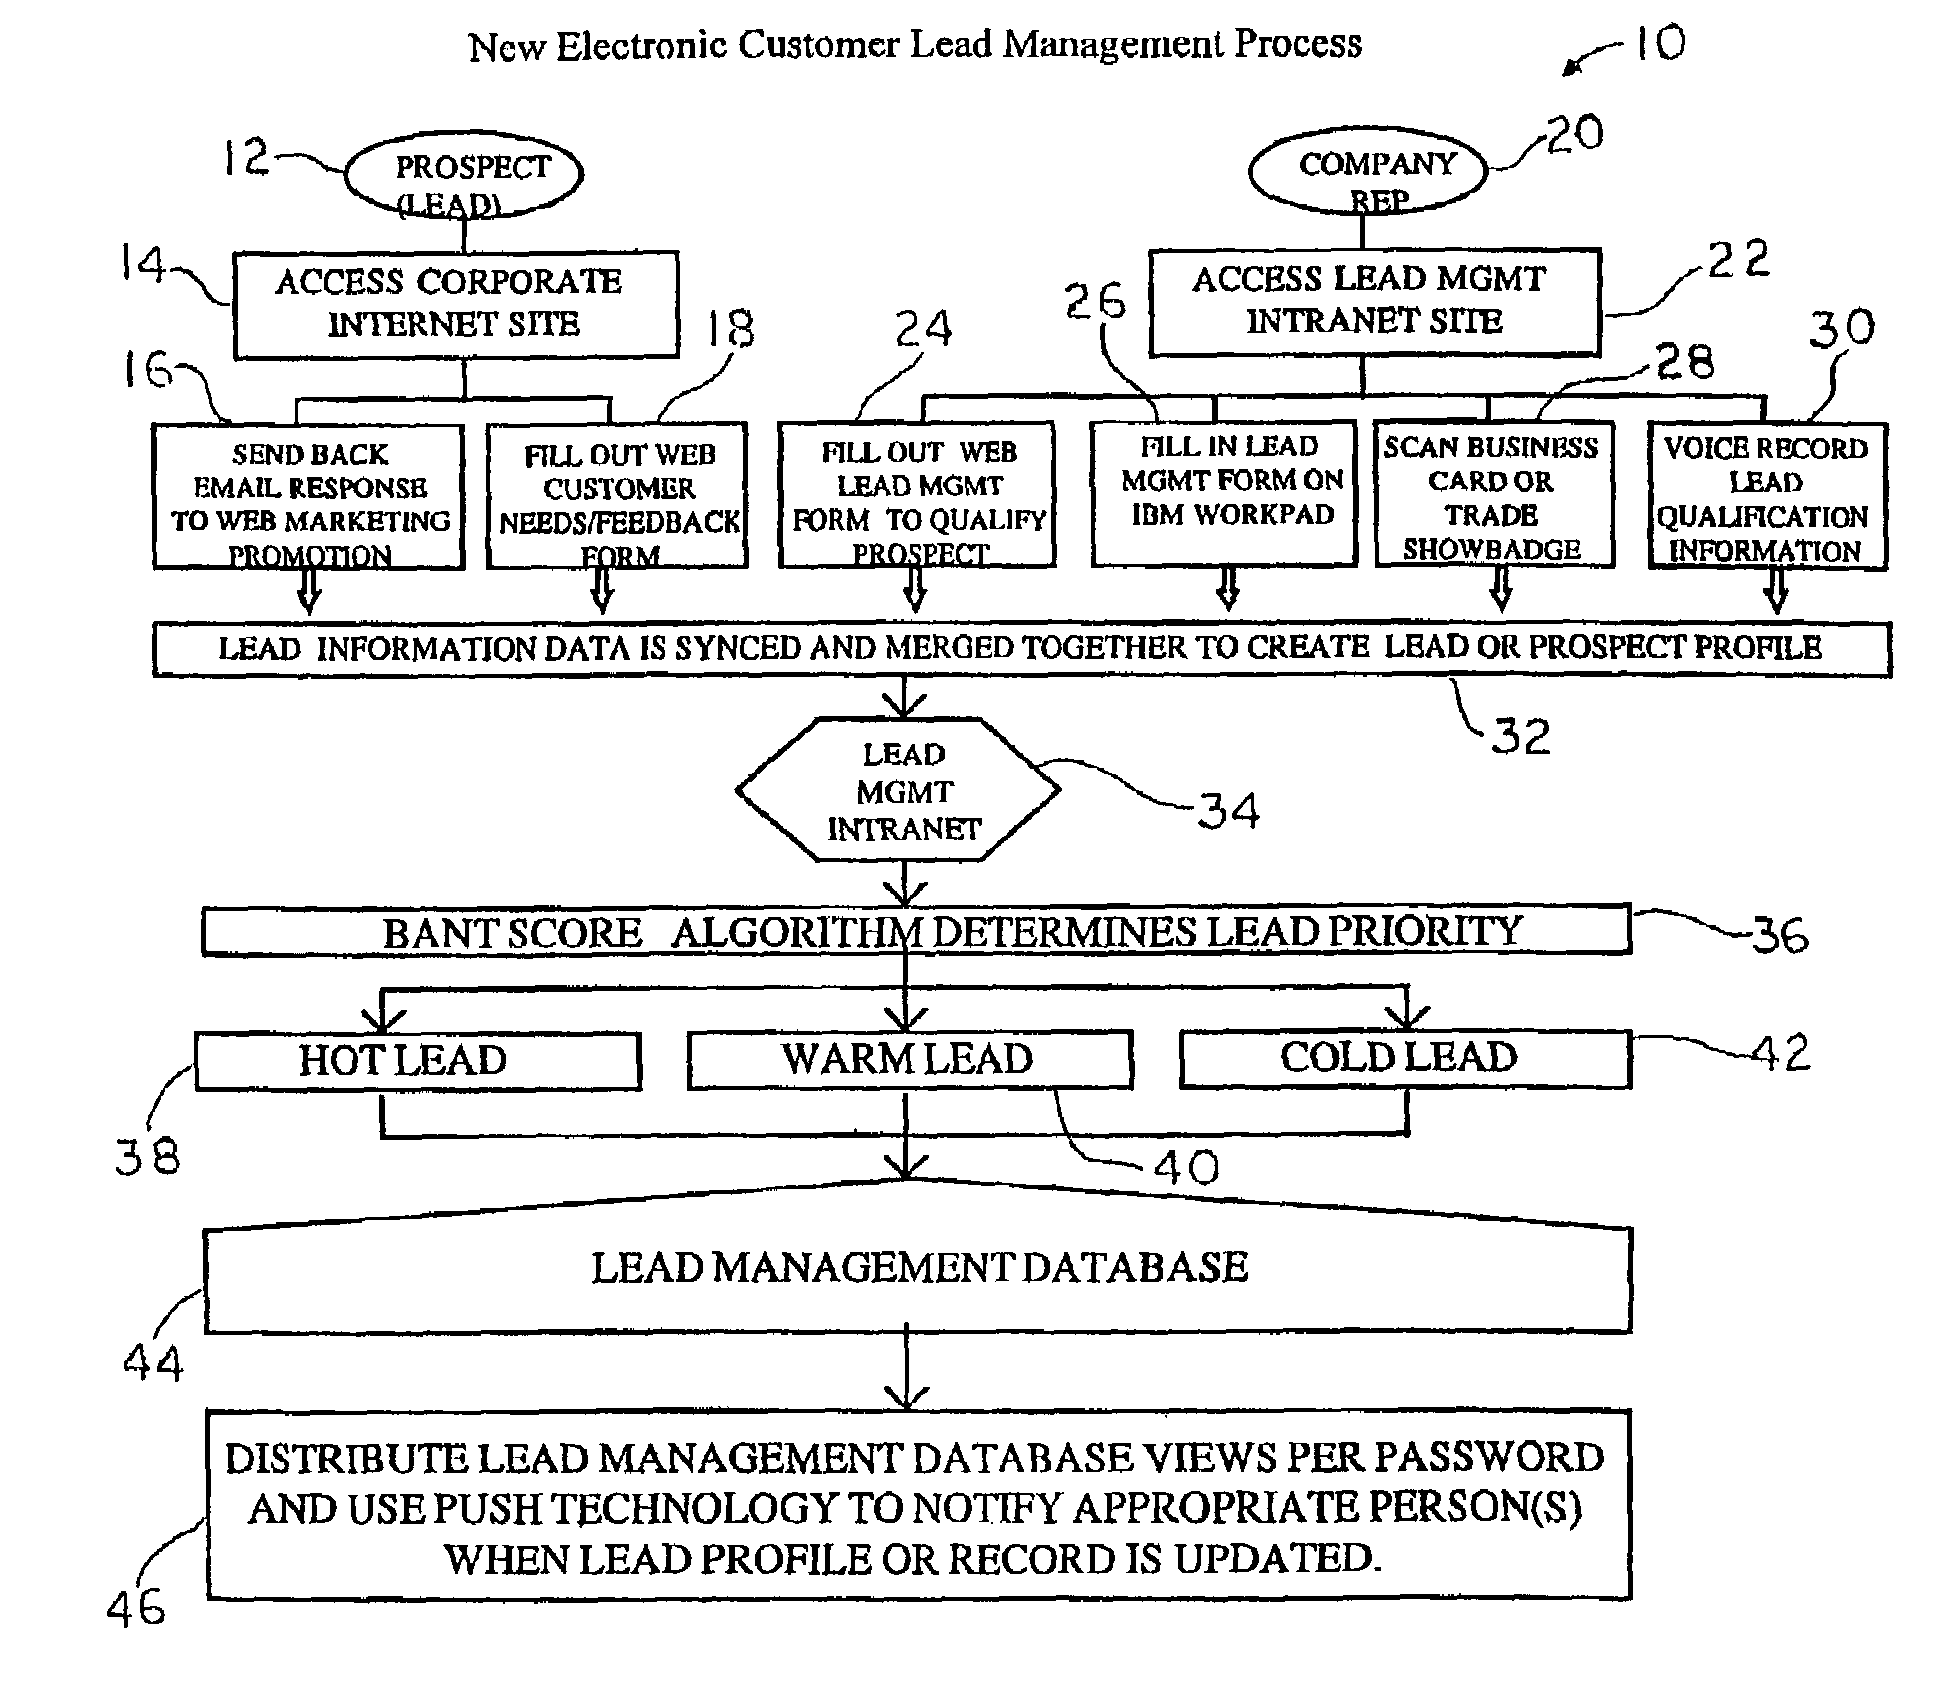 System and method for generating, capturing, and managing customer lead information over a computer network